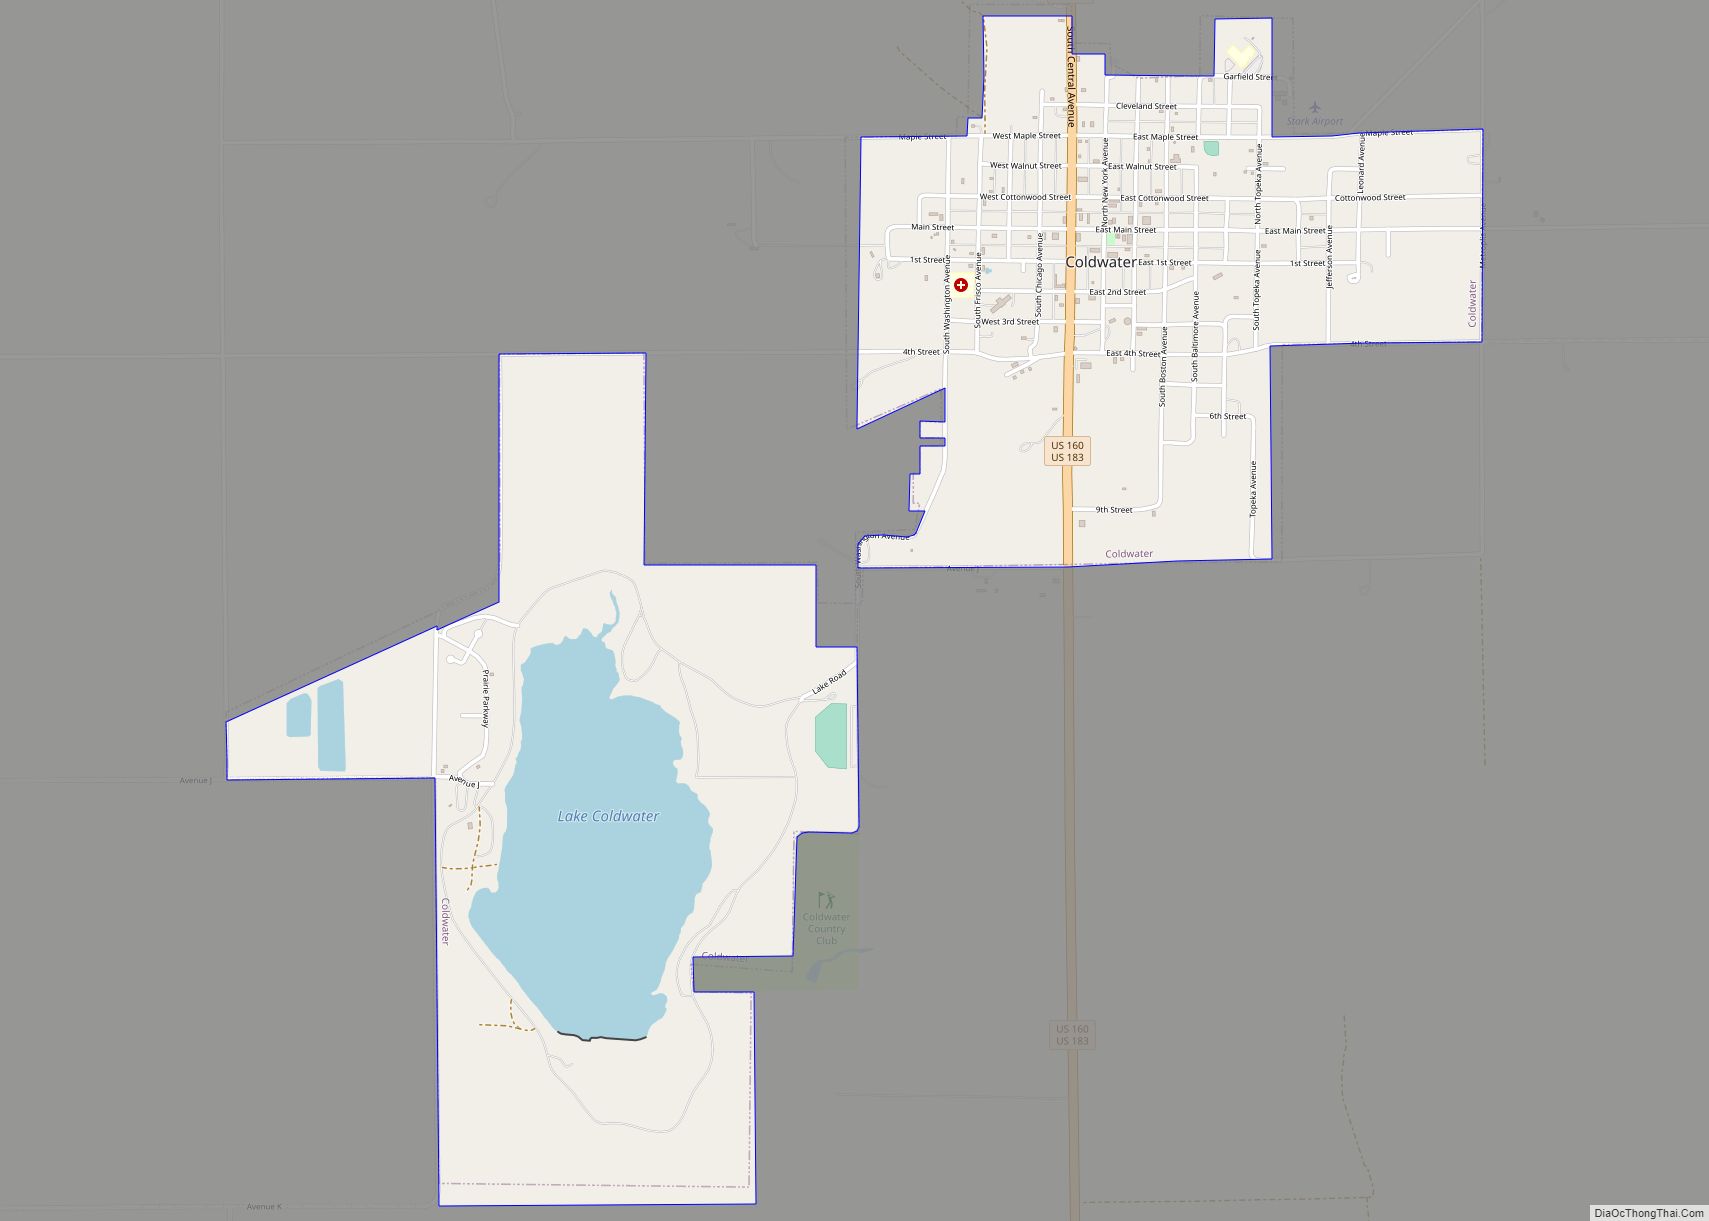 Map of Coldwater city